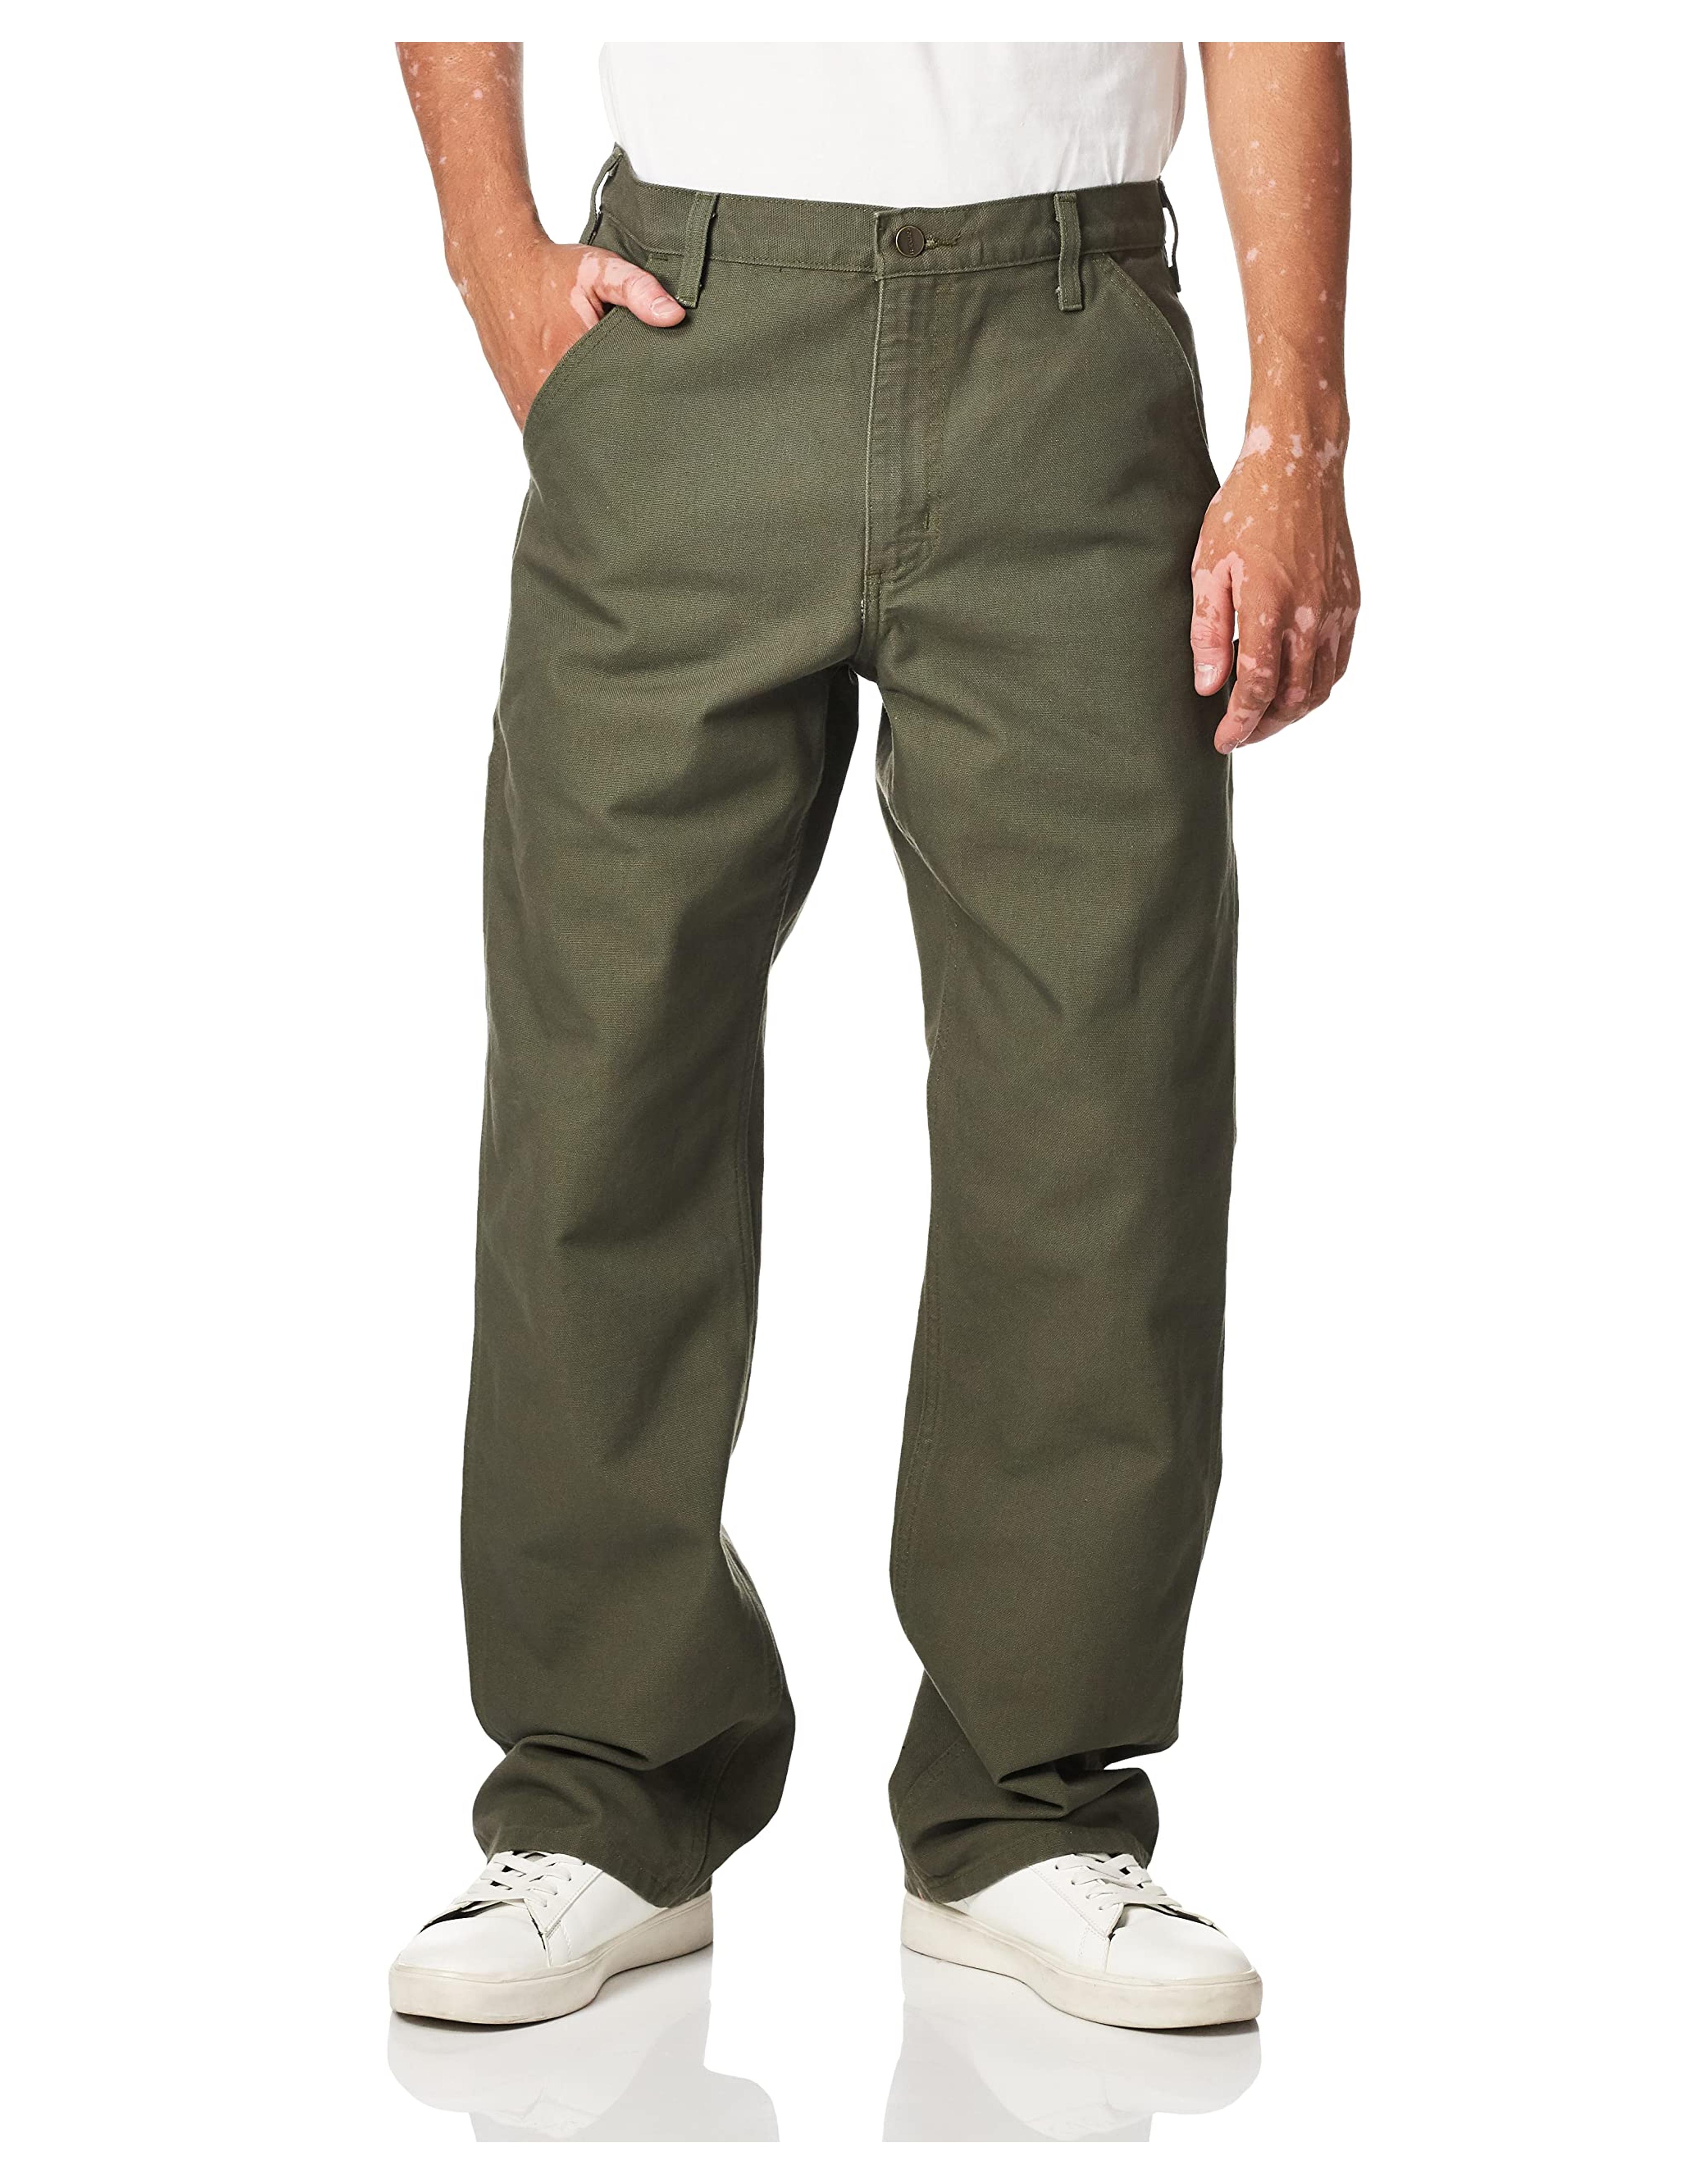 Amazon.com: Carhartt Men's Washed Duck Work Dungaree Pant, Moss, 38W x 30L: Casual Pants: Clothing, Shoes & Jewelry